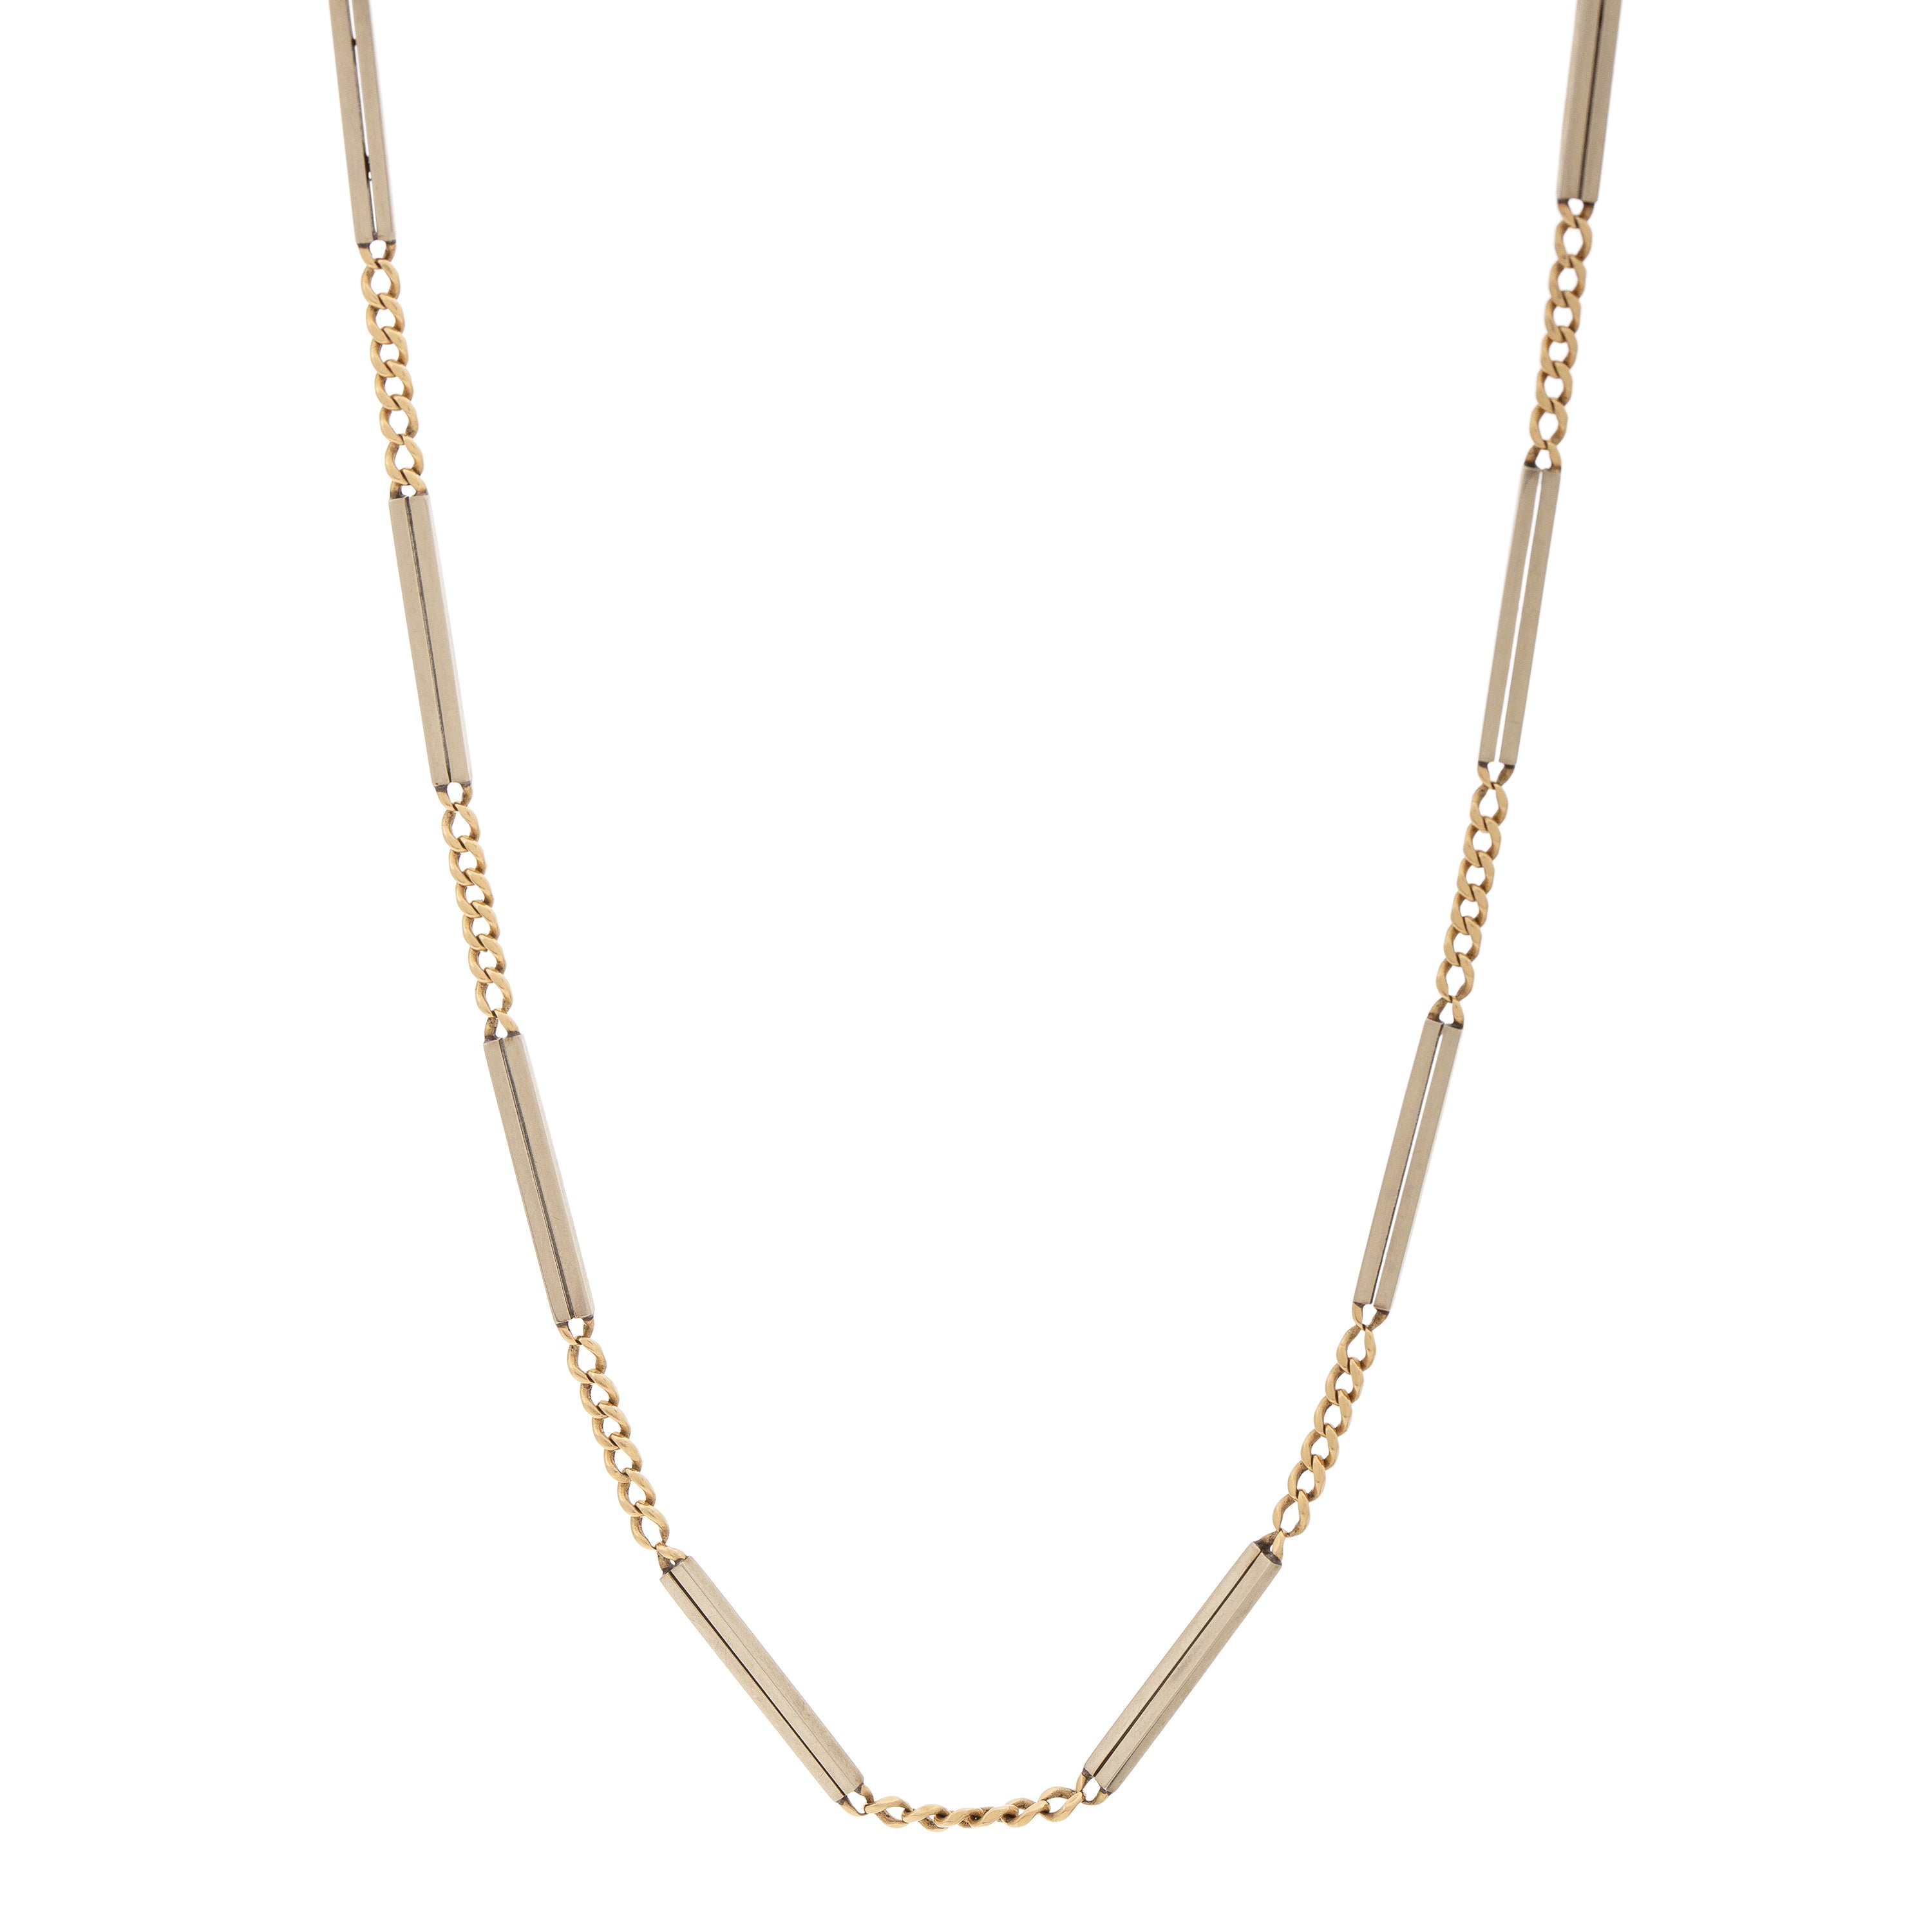 Edwardian 14k Gold And Platinum 15 Inch Chain Necklace